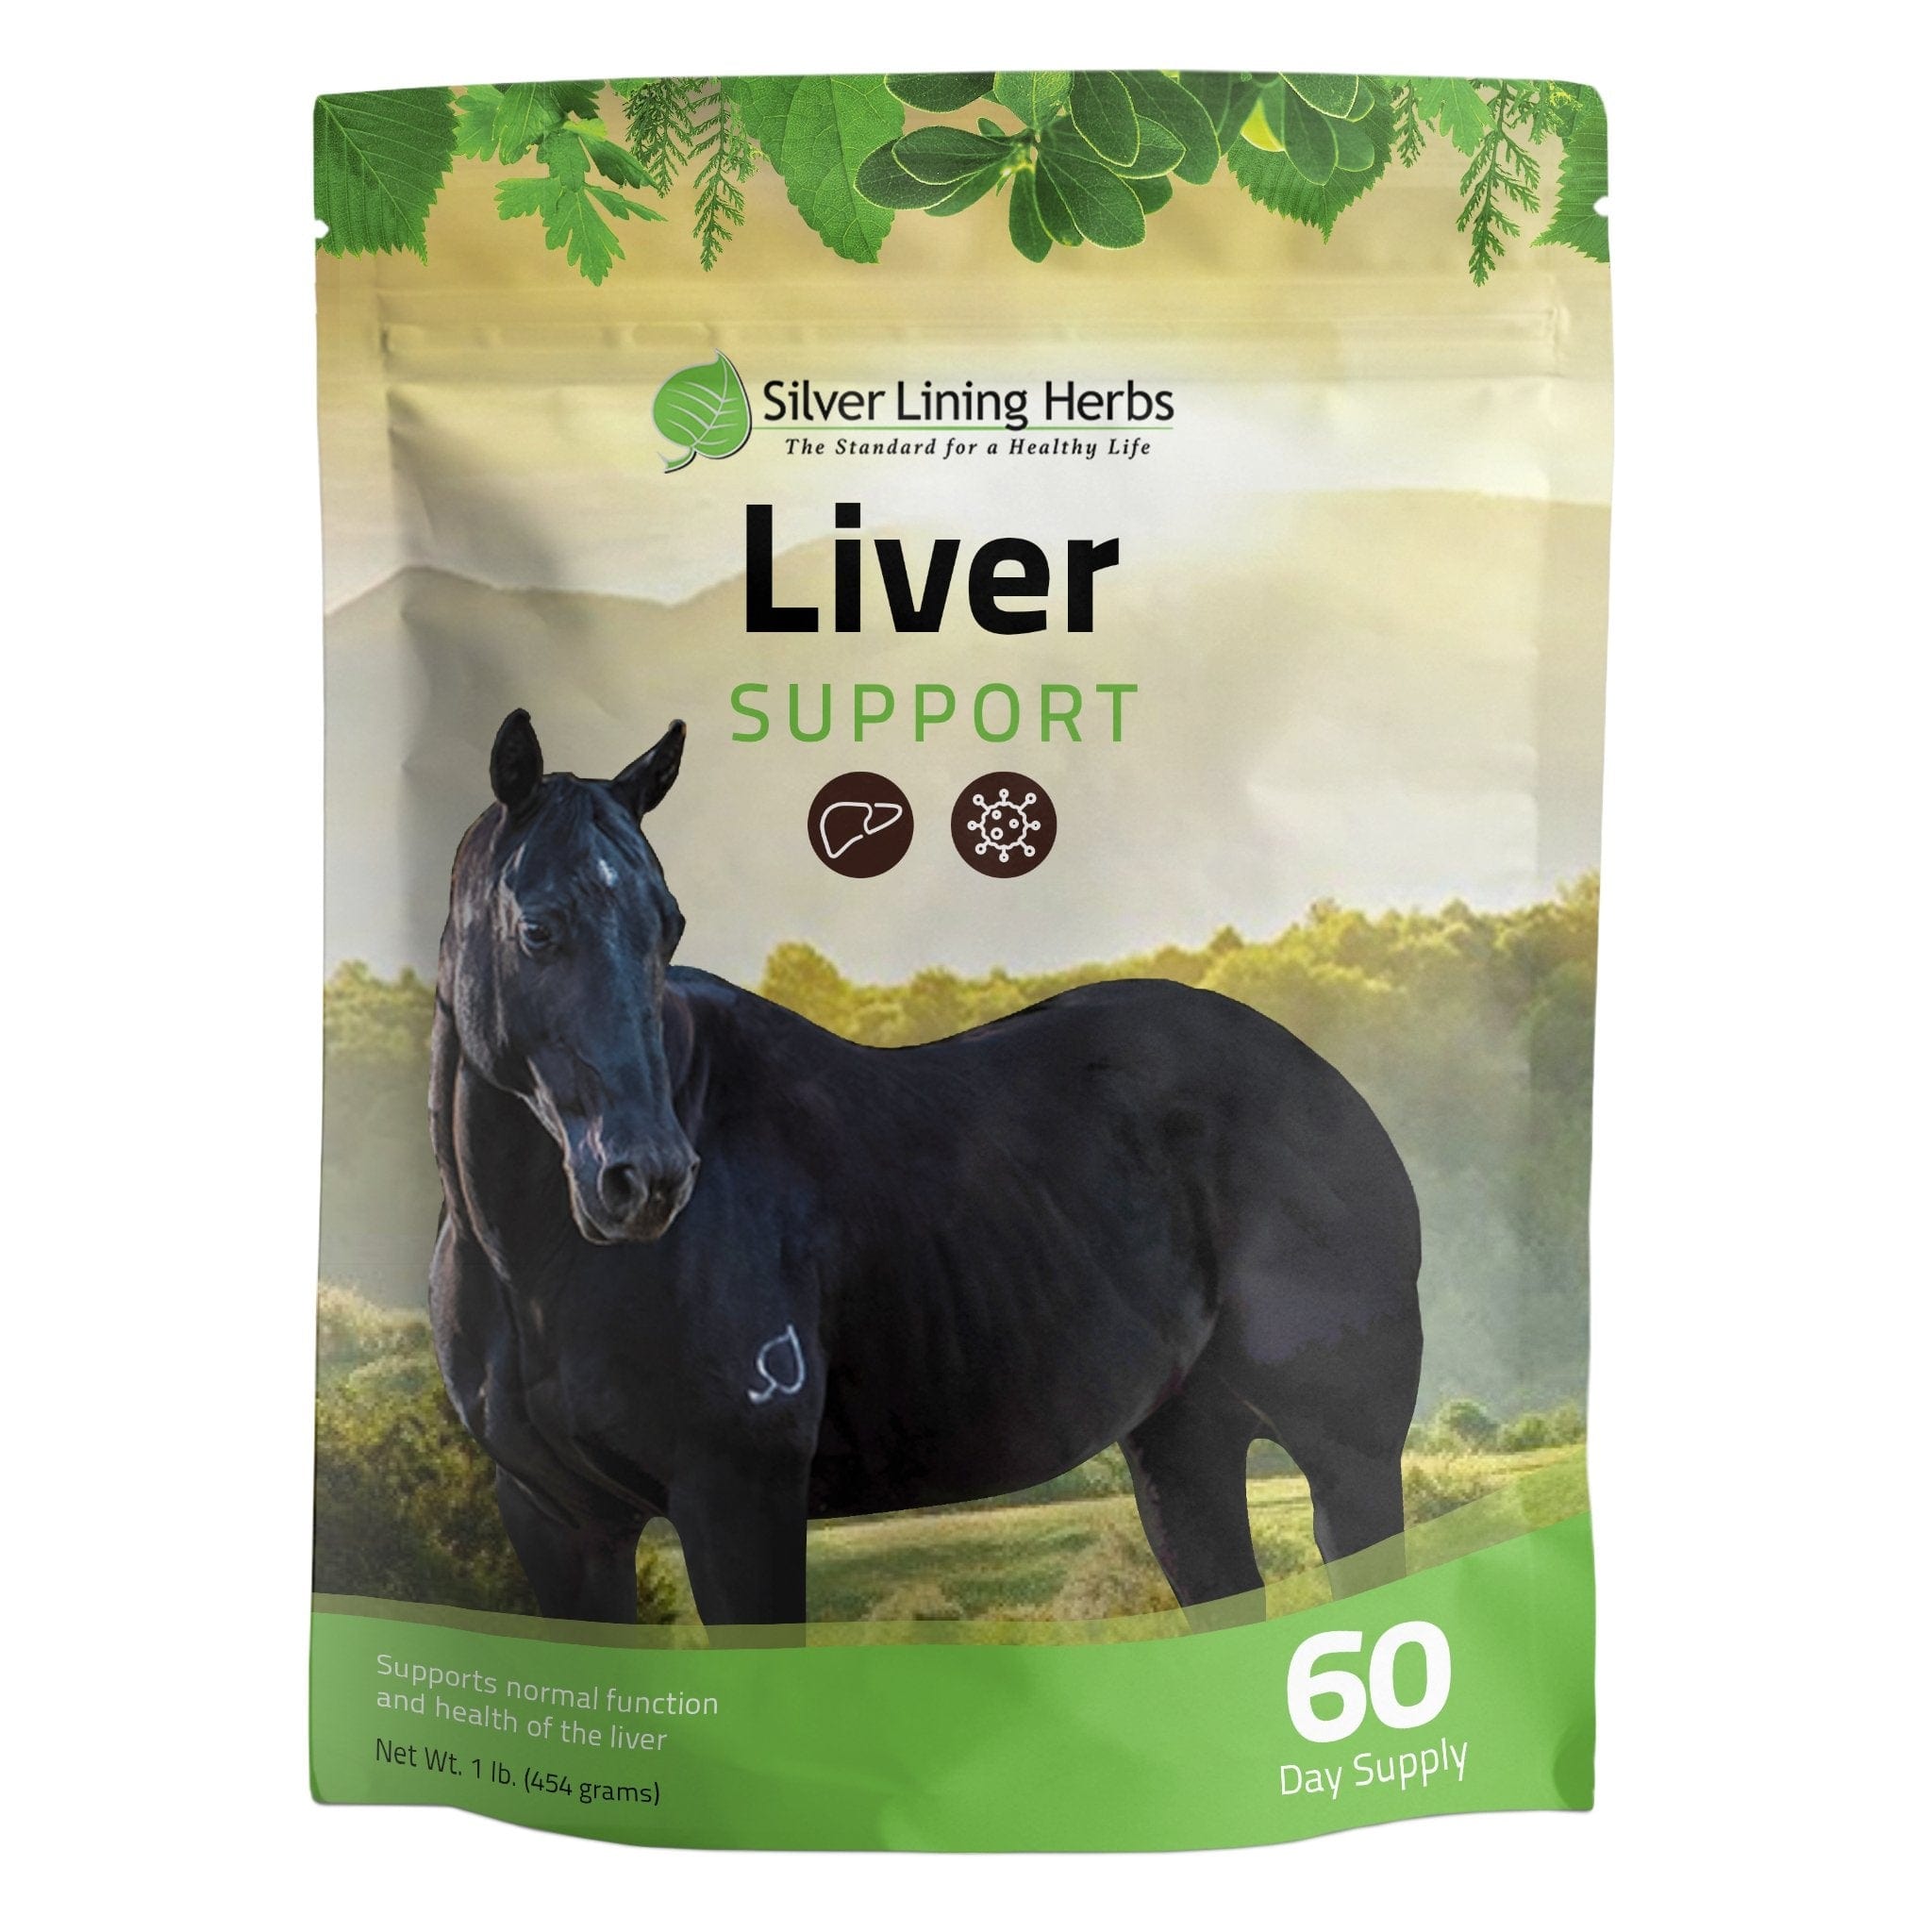 Liver Support for Horses - Silver Lining Herbs